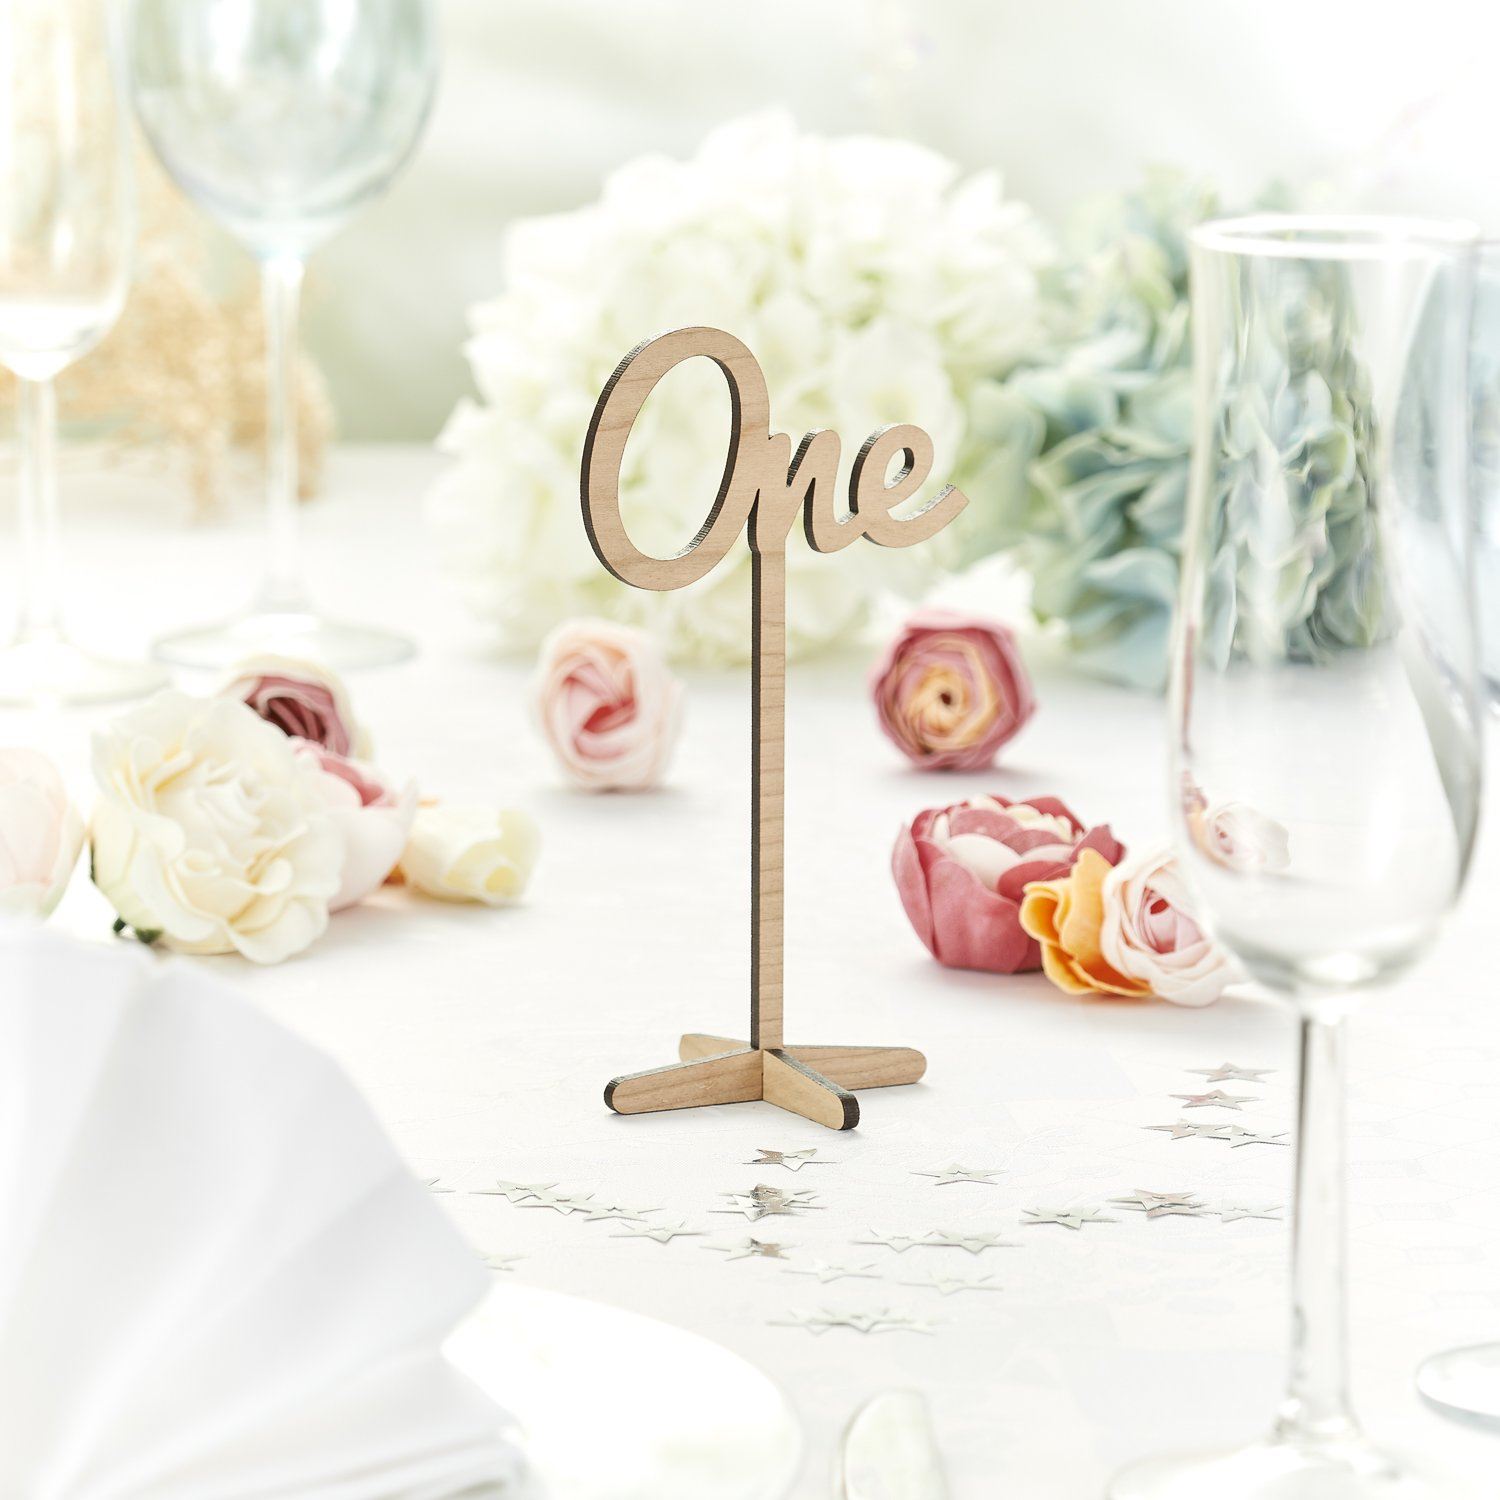 Table Numbers And Names - Rustic Wooden Wedding Table Numbers In Words